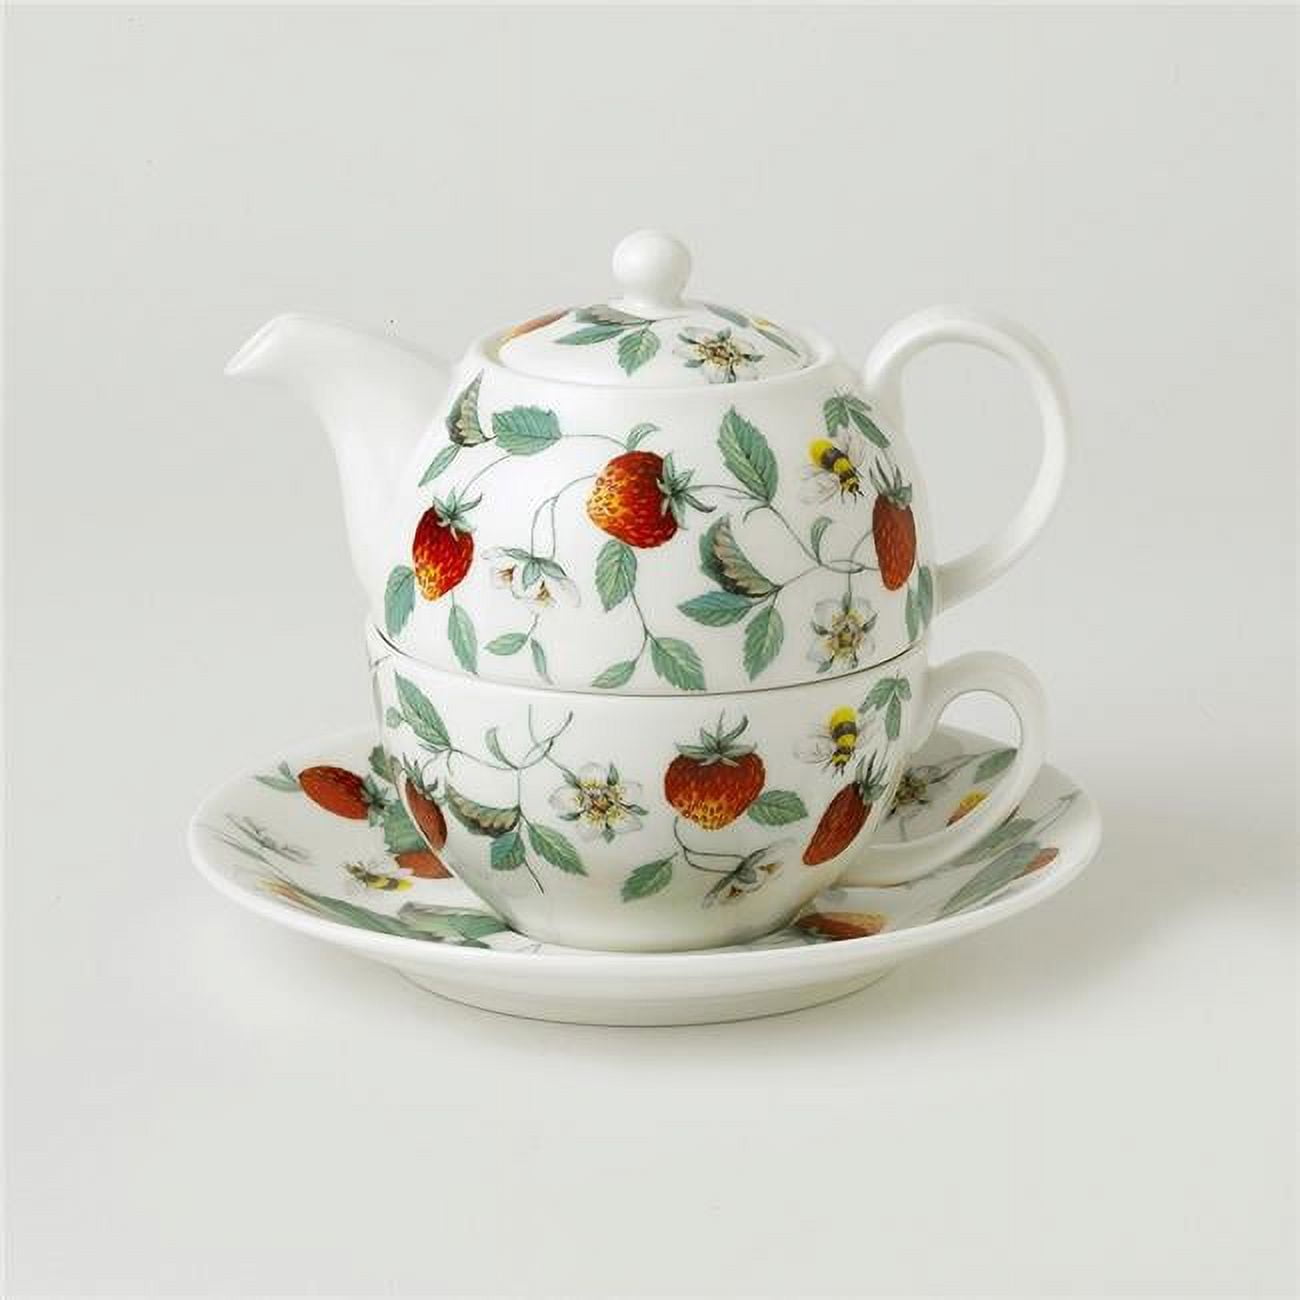 Countdown-to-Cook Tea for One Teapot with Tea Cup and Saucer - Alpine Strawberry